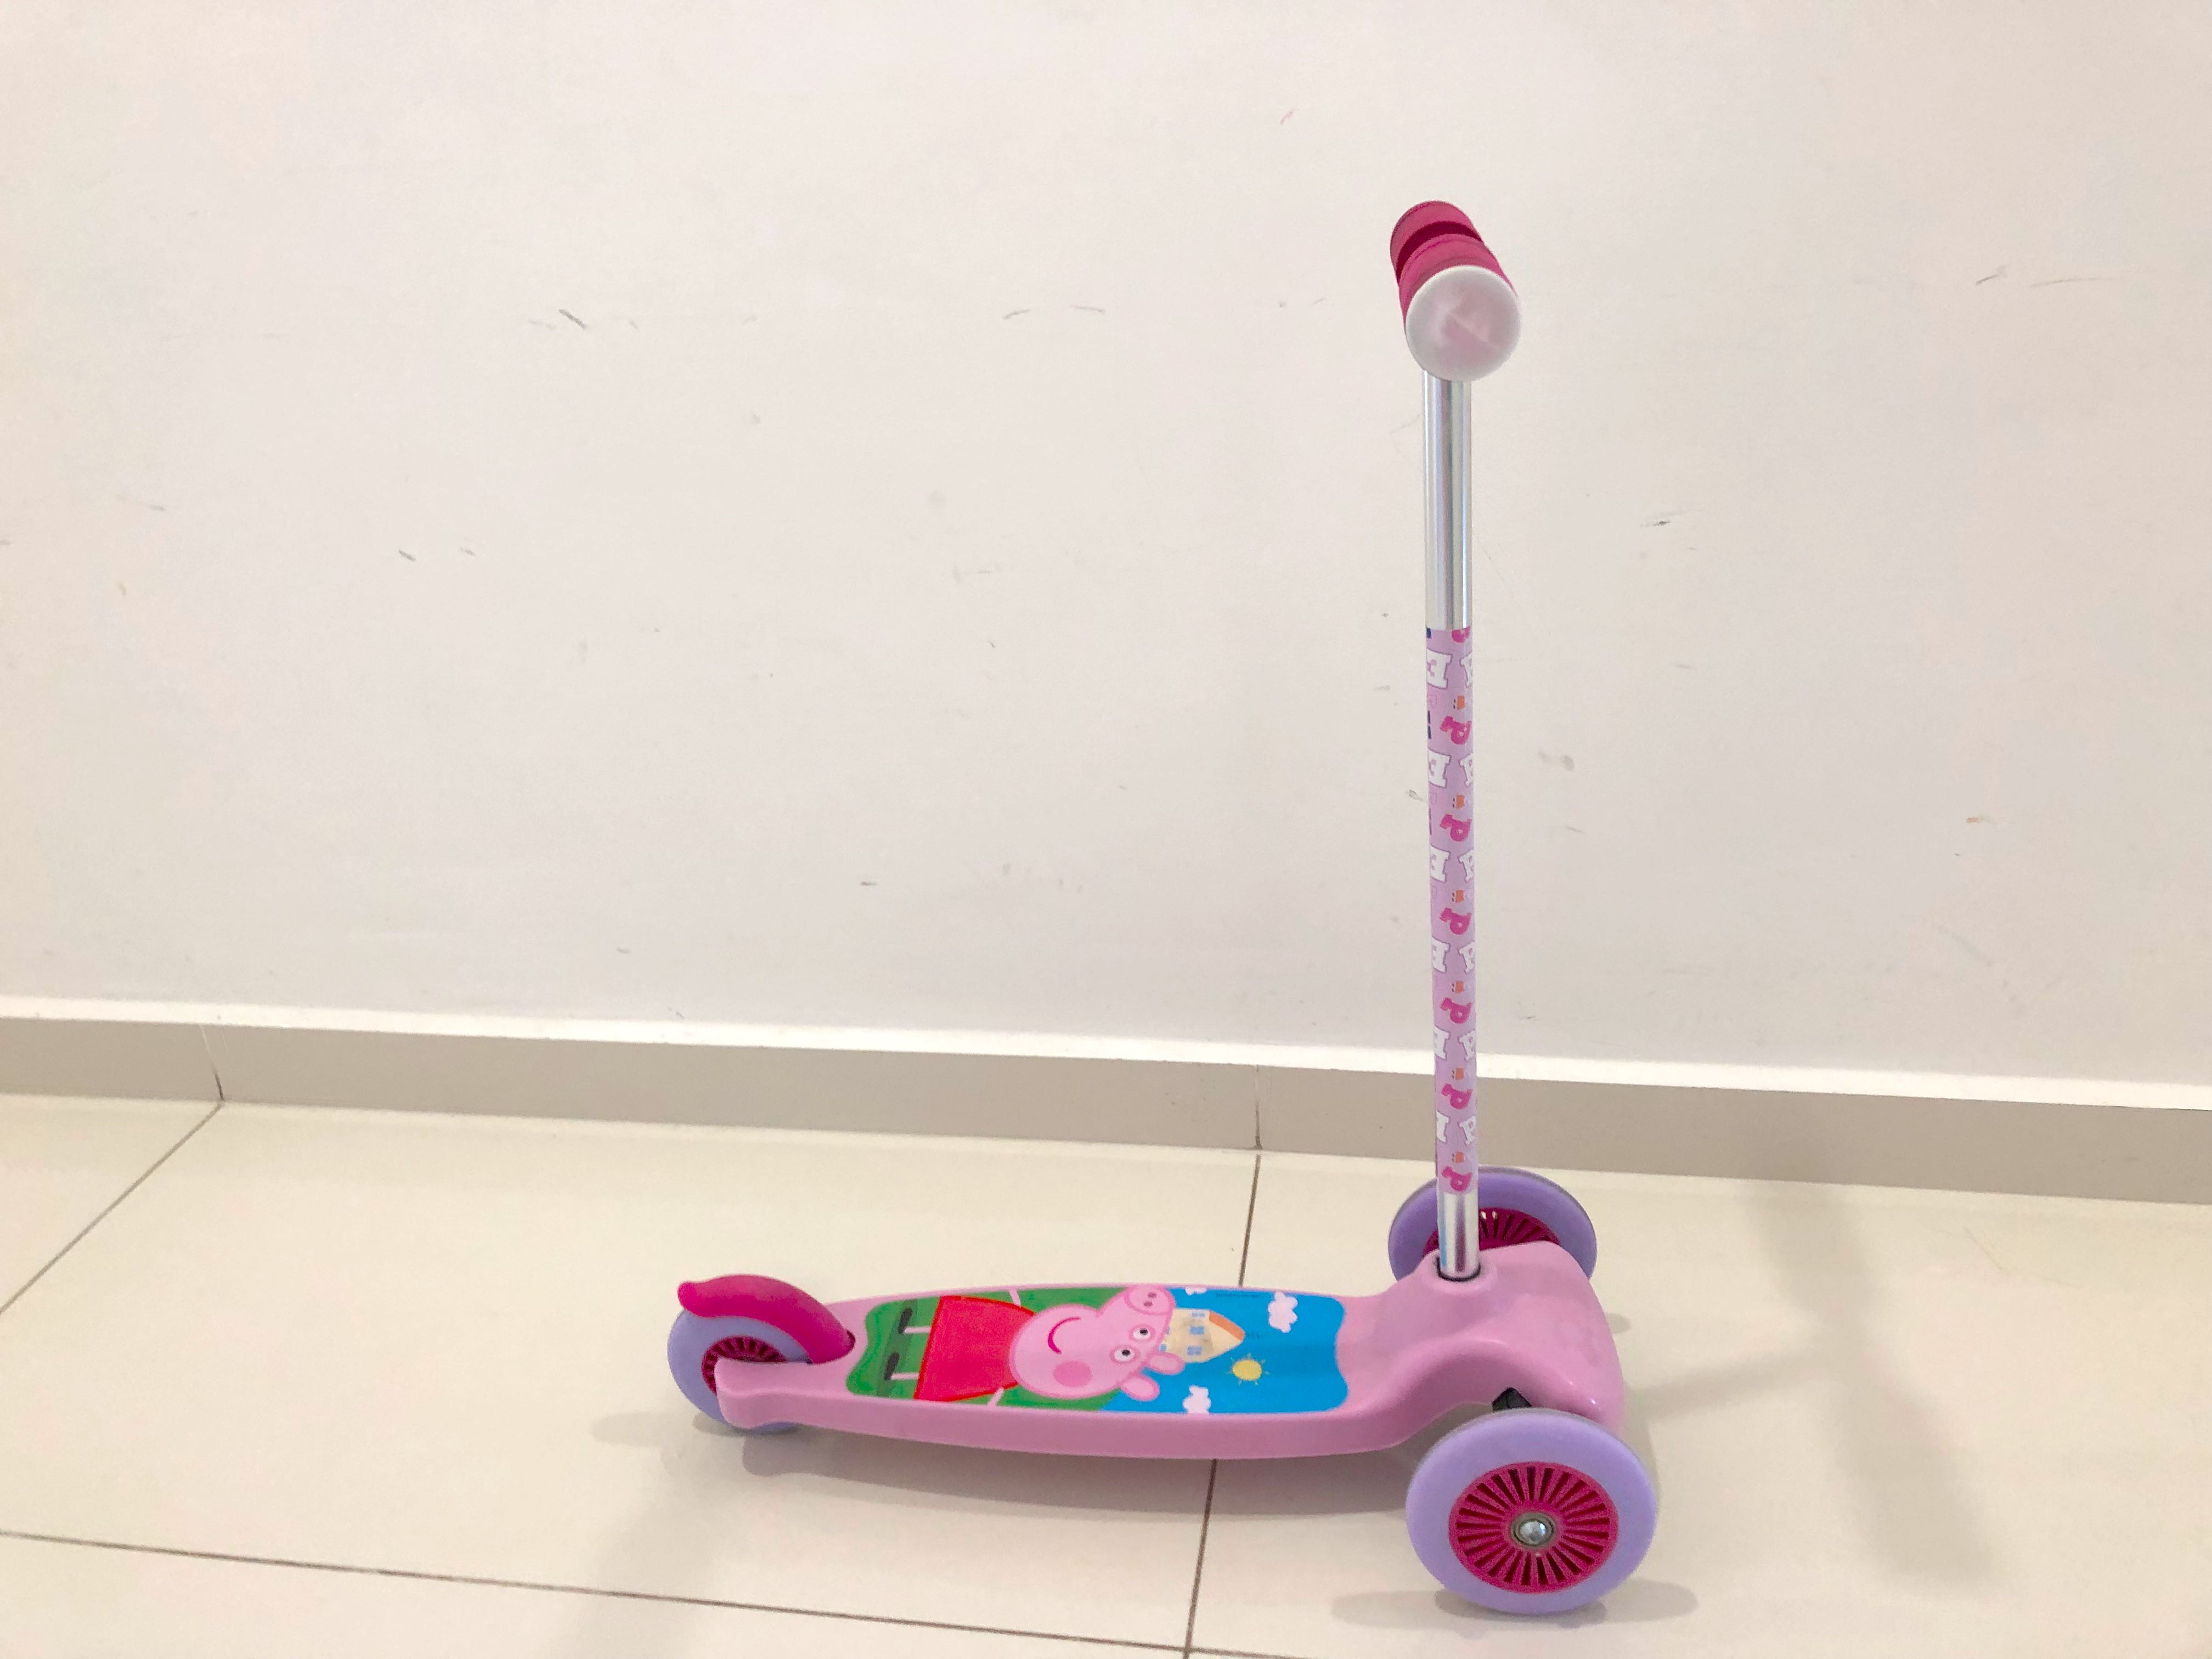 Details about   SCOOTER GIRLS PIG SKATEBOARD SEGWAY MUSIC BALANCE CAR PEPPA STYLE PINK DOLL TOYS 